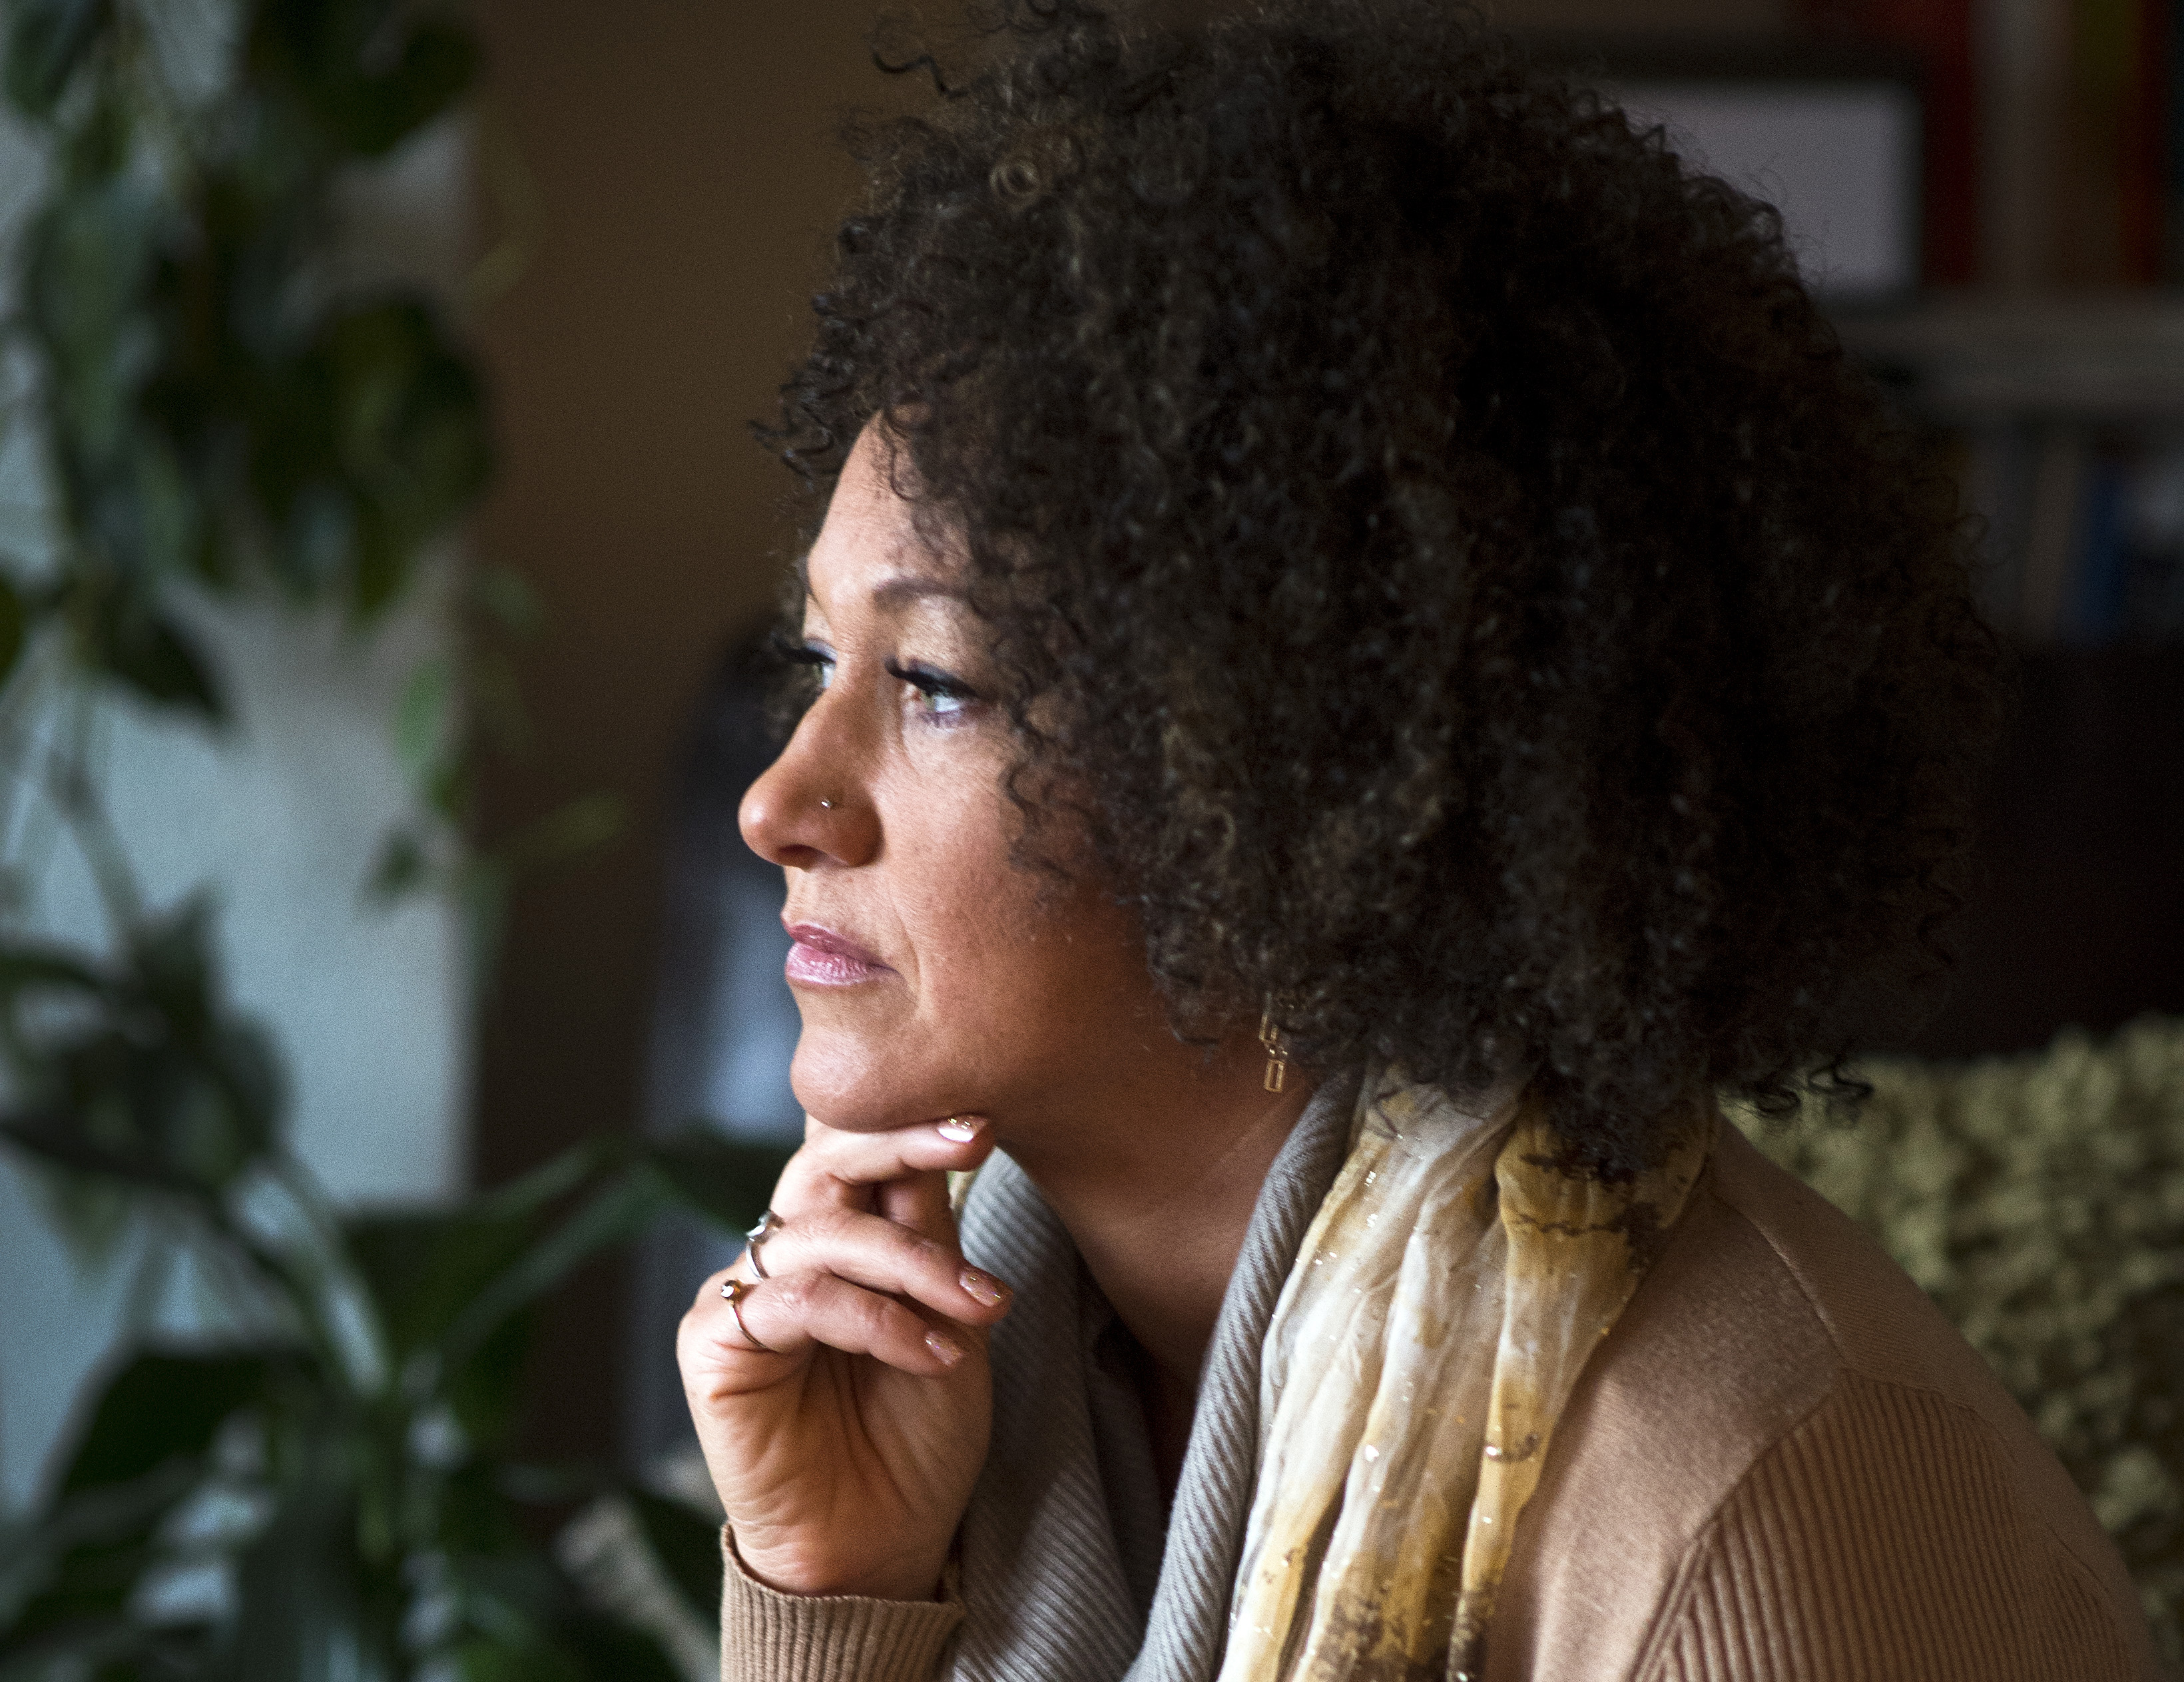 Rachel Dolezal, president of the Spokane chapter of the NAACP, poses for a photo in her Spokane, Wash., home on March 2, 2015. (Colin Mulvany—The Spokesman-Review/AP)